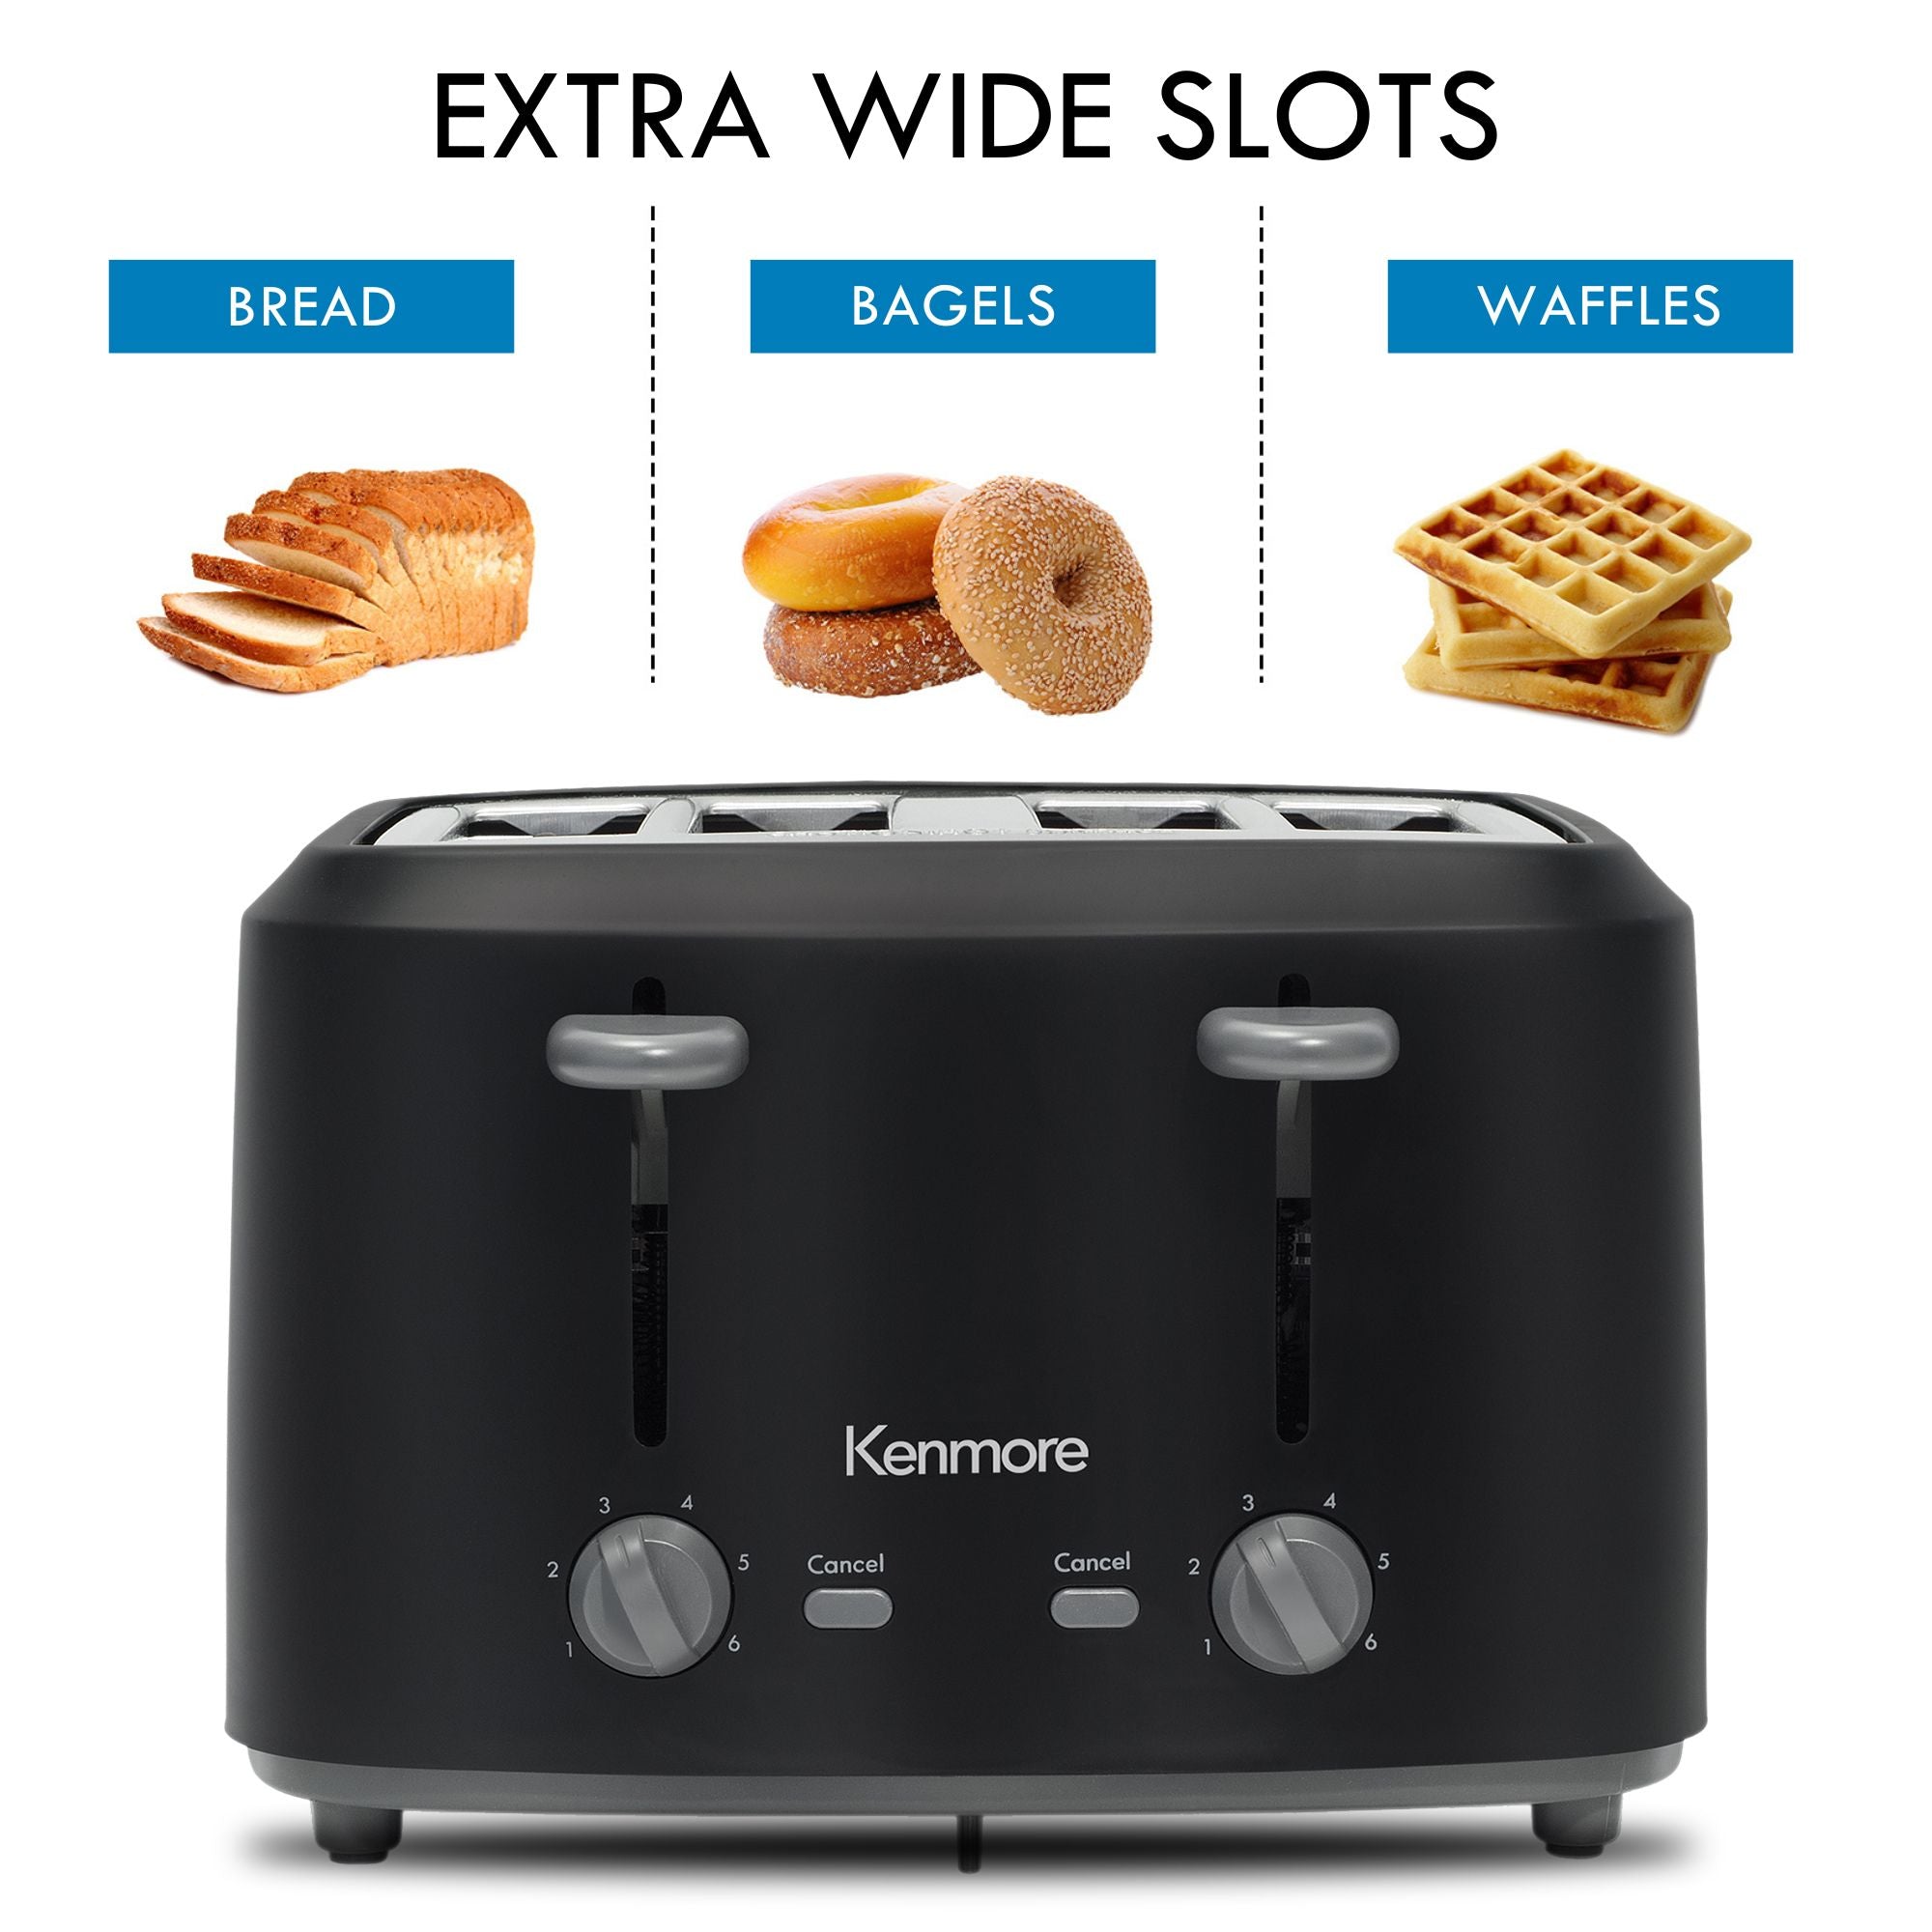 Kenmore 4-slice matte black toaster on a white background. Above are small pictures of a loaf of bread, a stack of bagels, and a stack of waffles, labeled. Text at the top reads, "Extra wide slots"